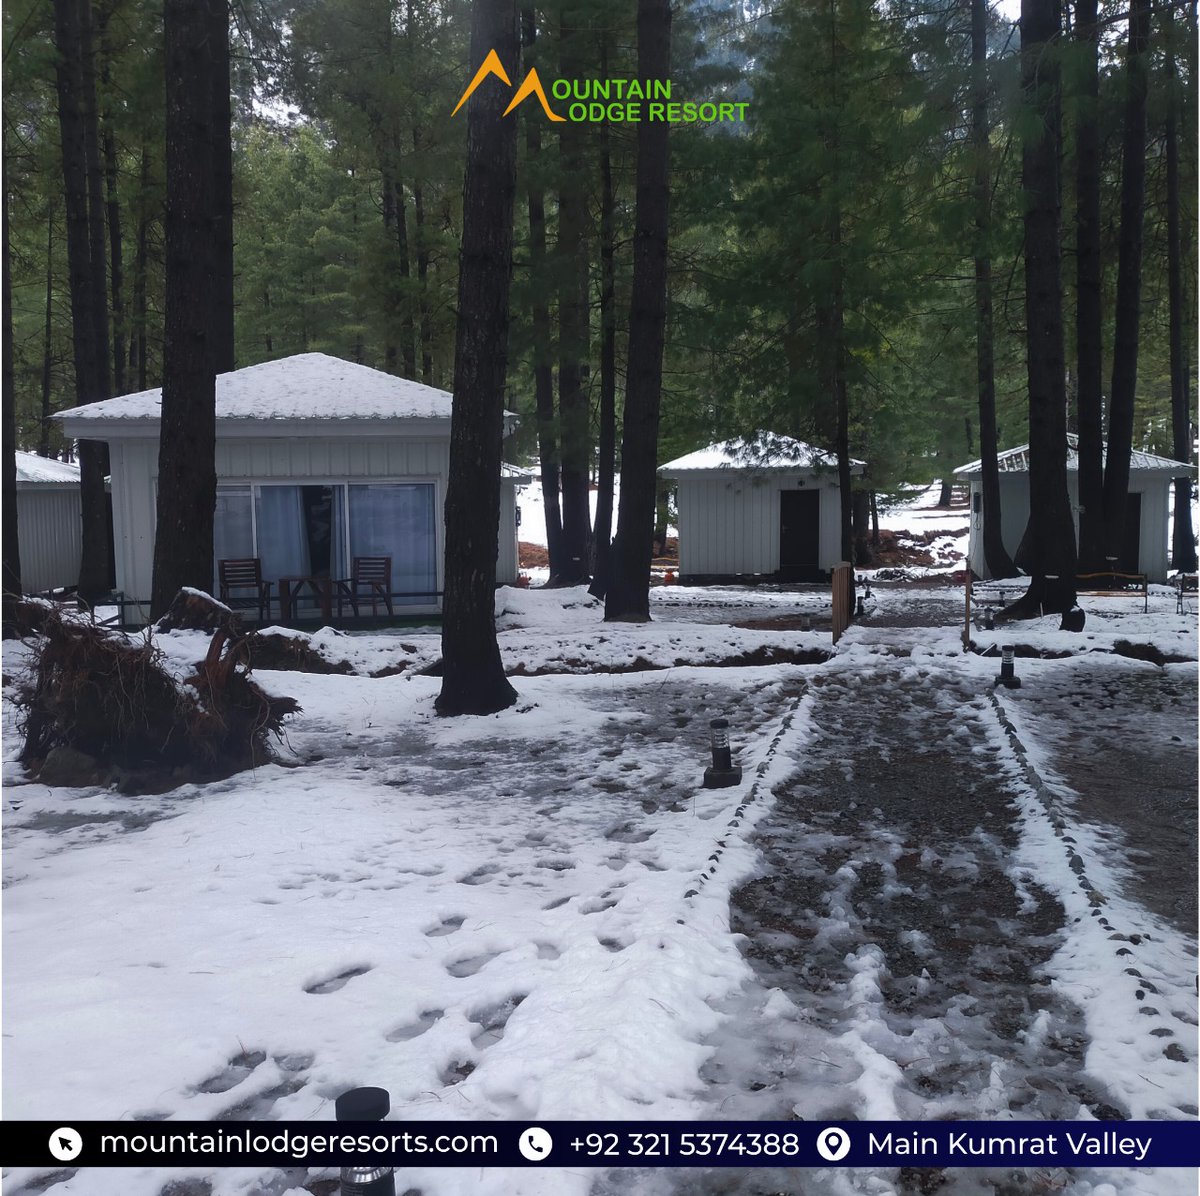 Escape to luxury at Mountain Lodge Resort! Check out the breathtaking views of the weather and mountains while enjoying your stay in our luxurious accommodations. 
#MountainLodgeResort #LuxuryStay #NatureViews #MountainRetreat #GetawayGoals